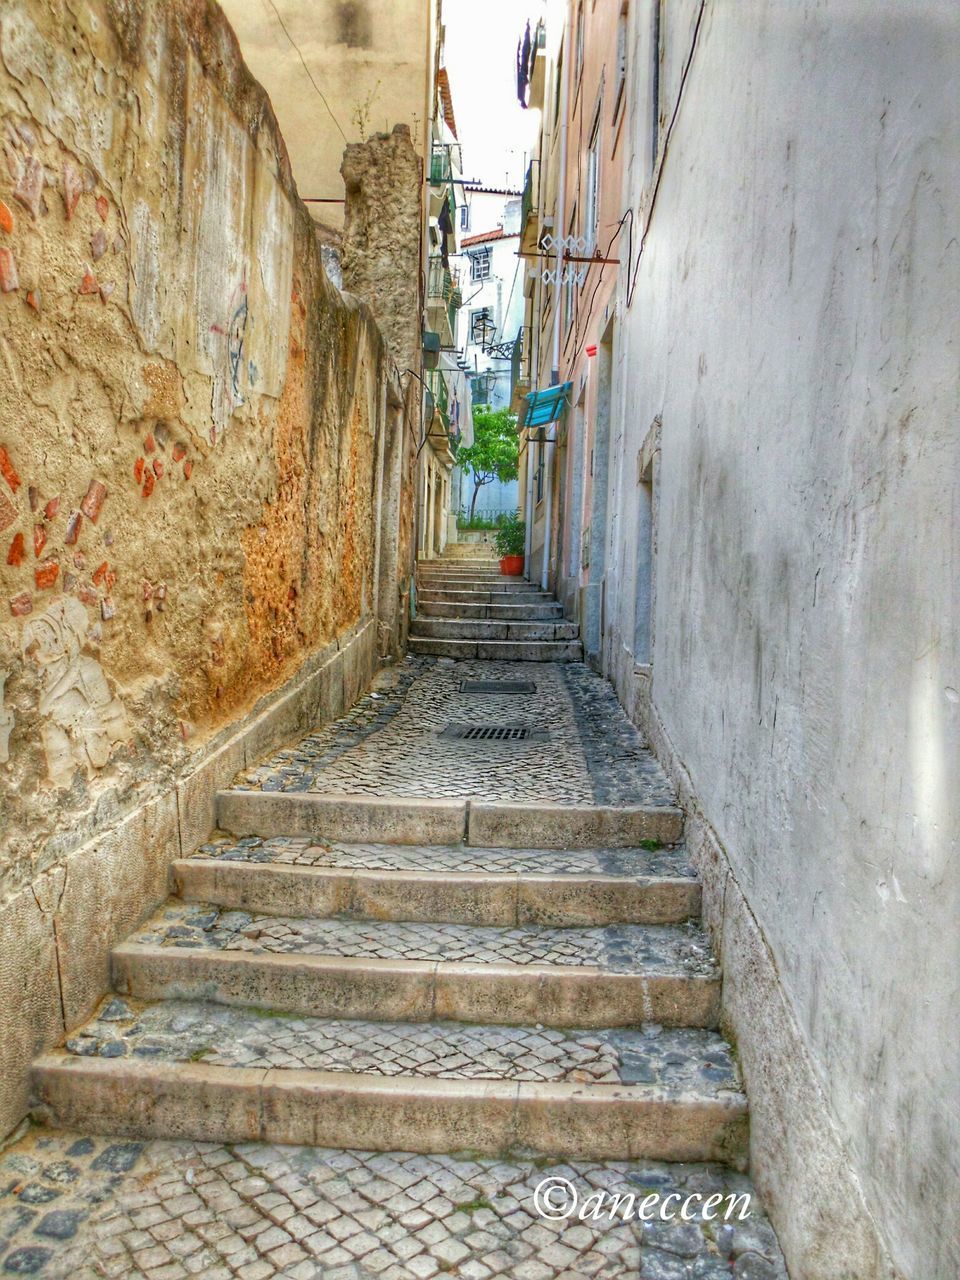 architecture, the way forward, built structure, steps, building exterior, steps and staircases, staircase, narrow, wall - building feature, diminishing perspective, building, alley, vanishing point, old, house, wall, pathway, day, stone wall, cobblestone